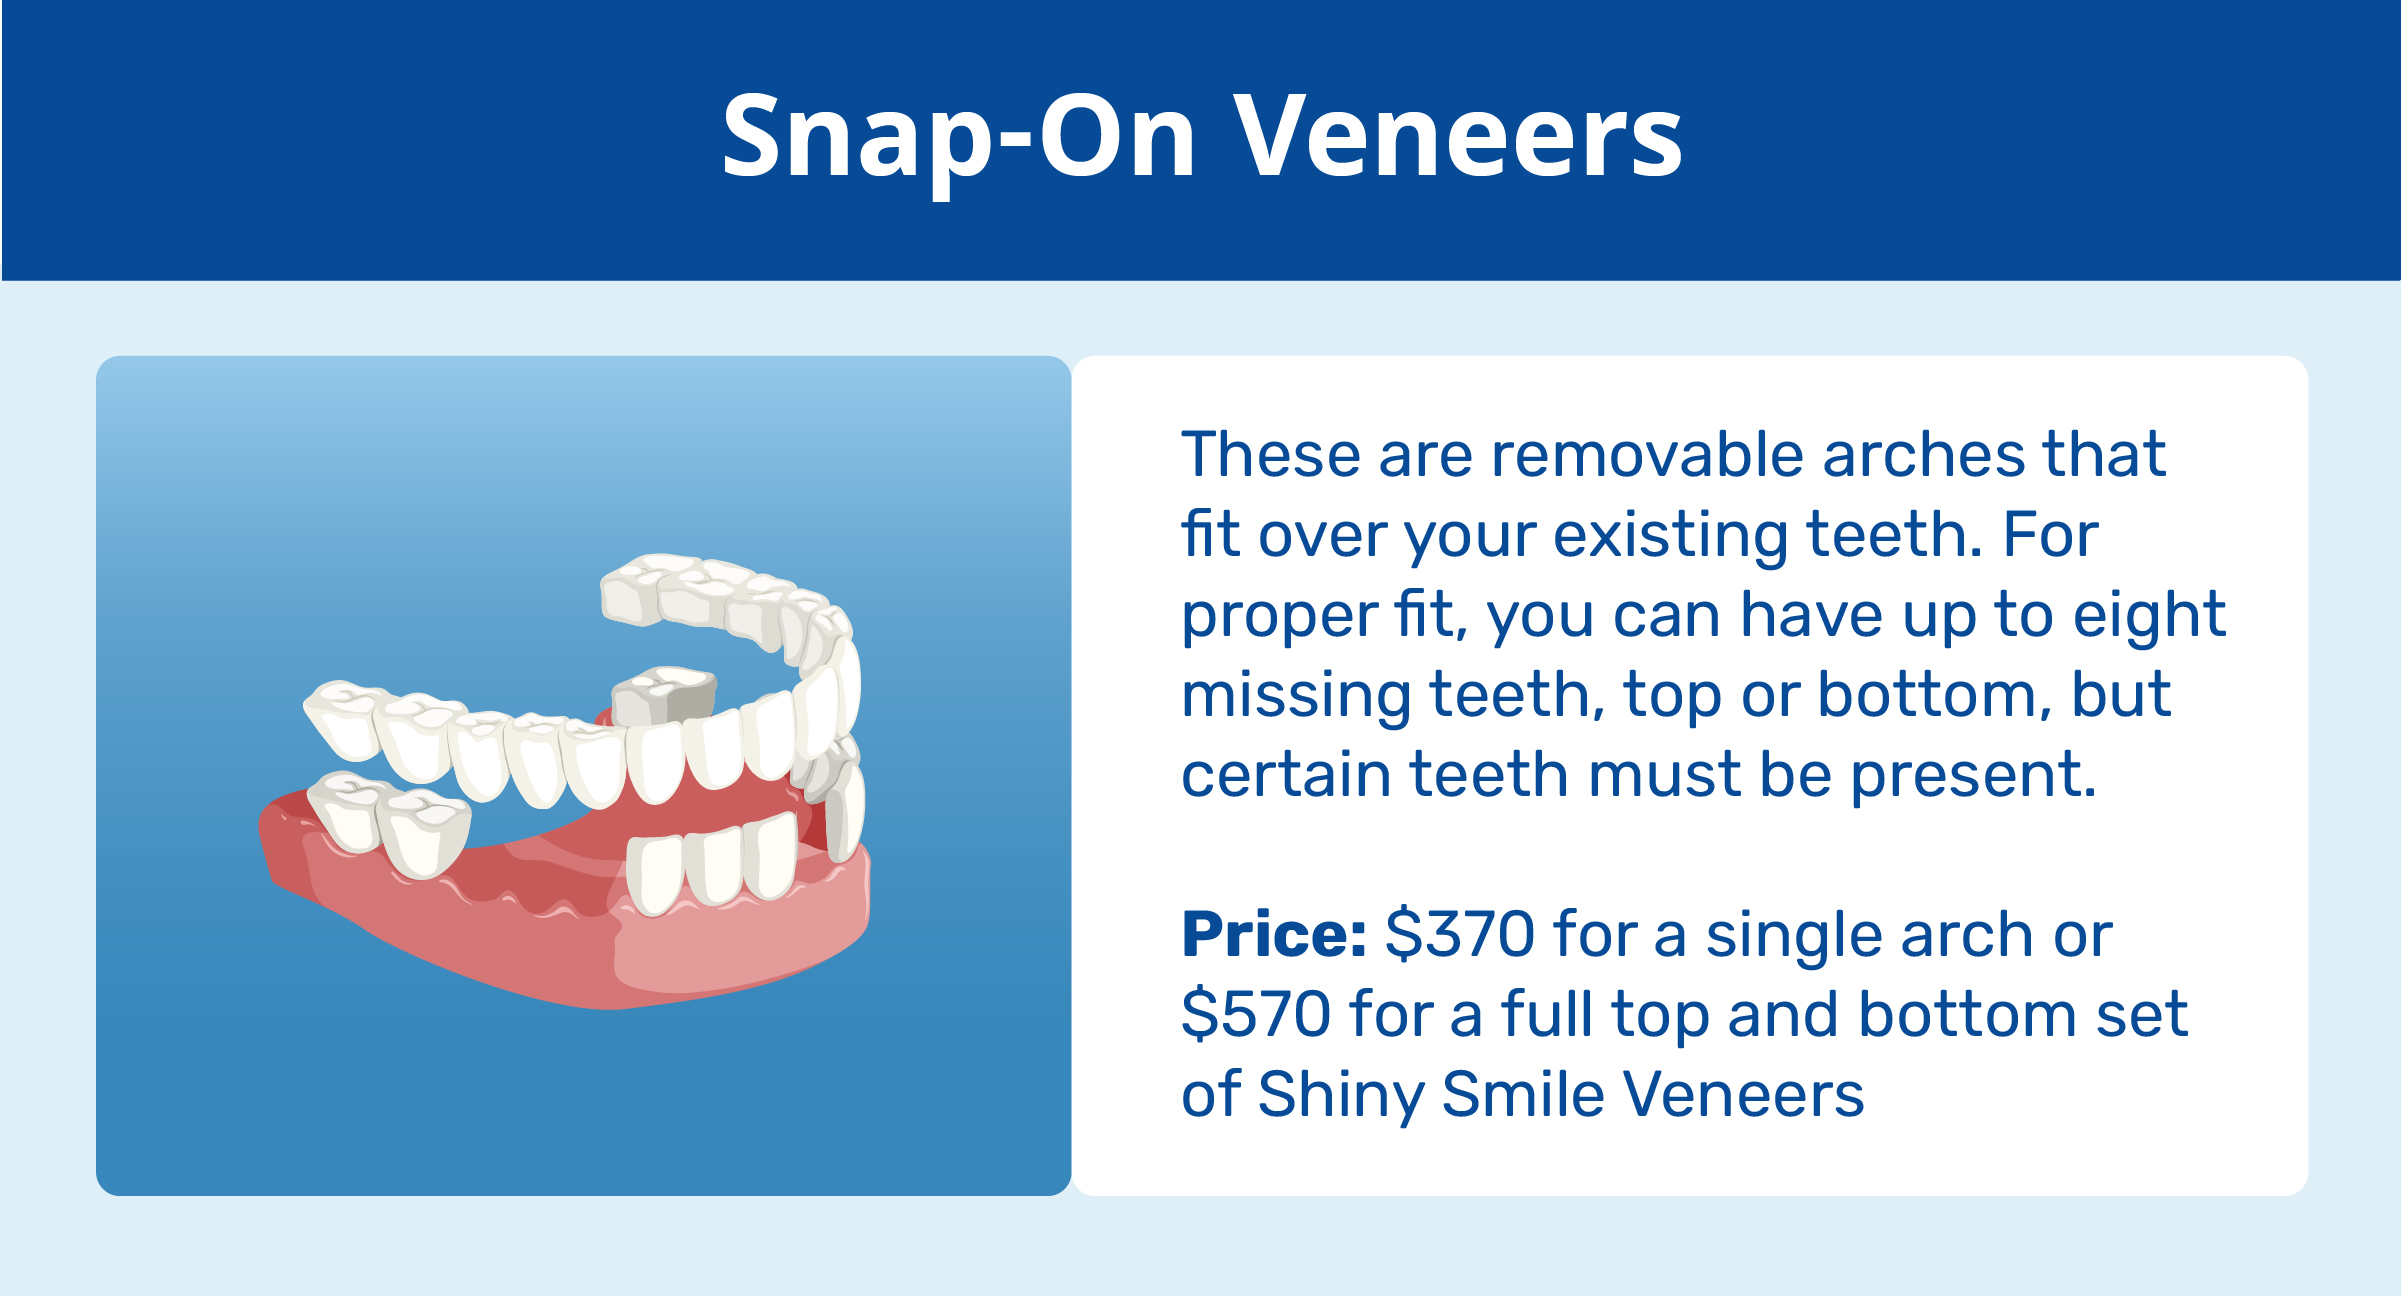 snap-on veneers explanation and price